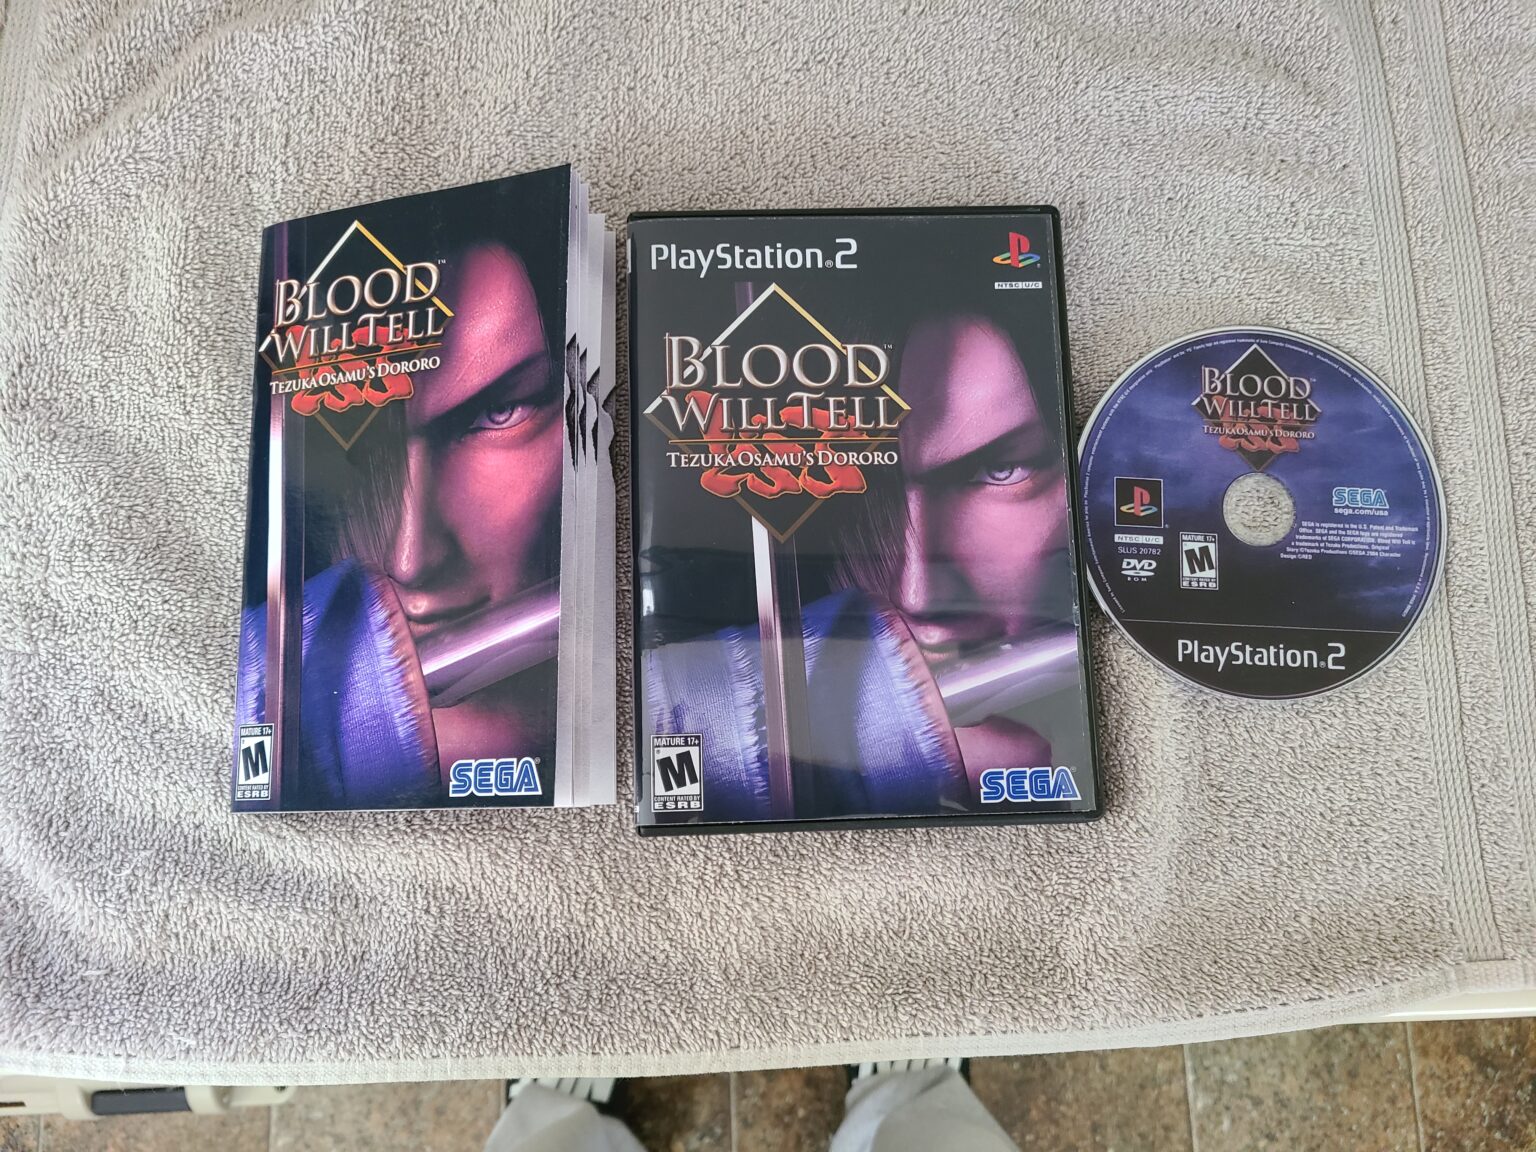 blood-will-tell-for-the-playstation-2-konis-games-and-more